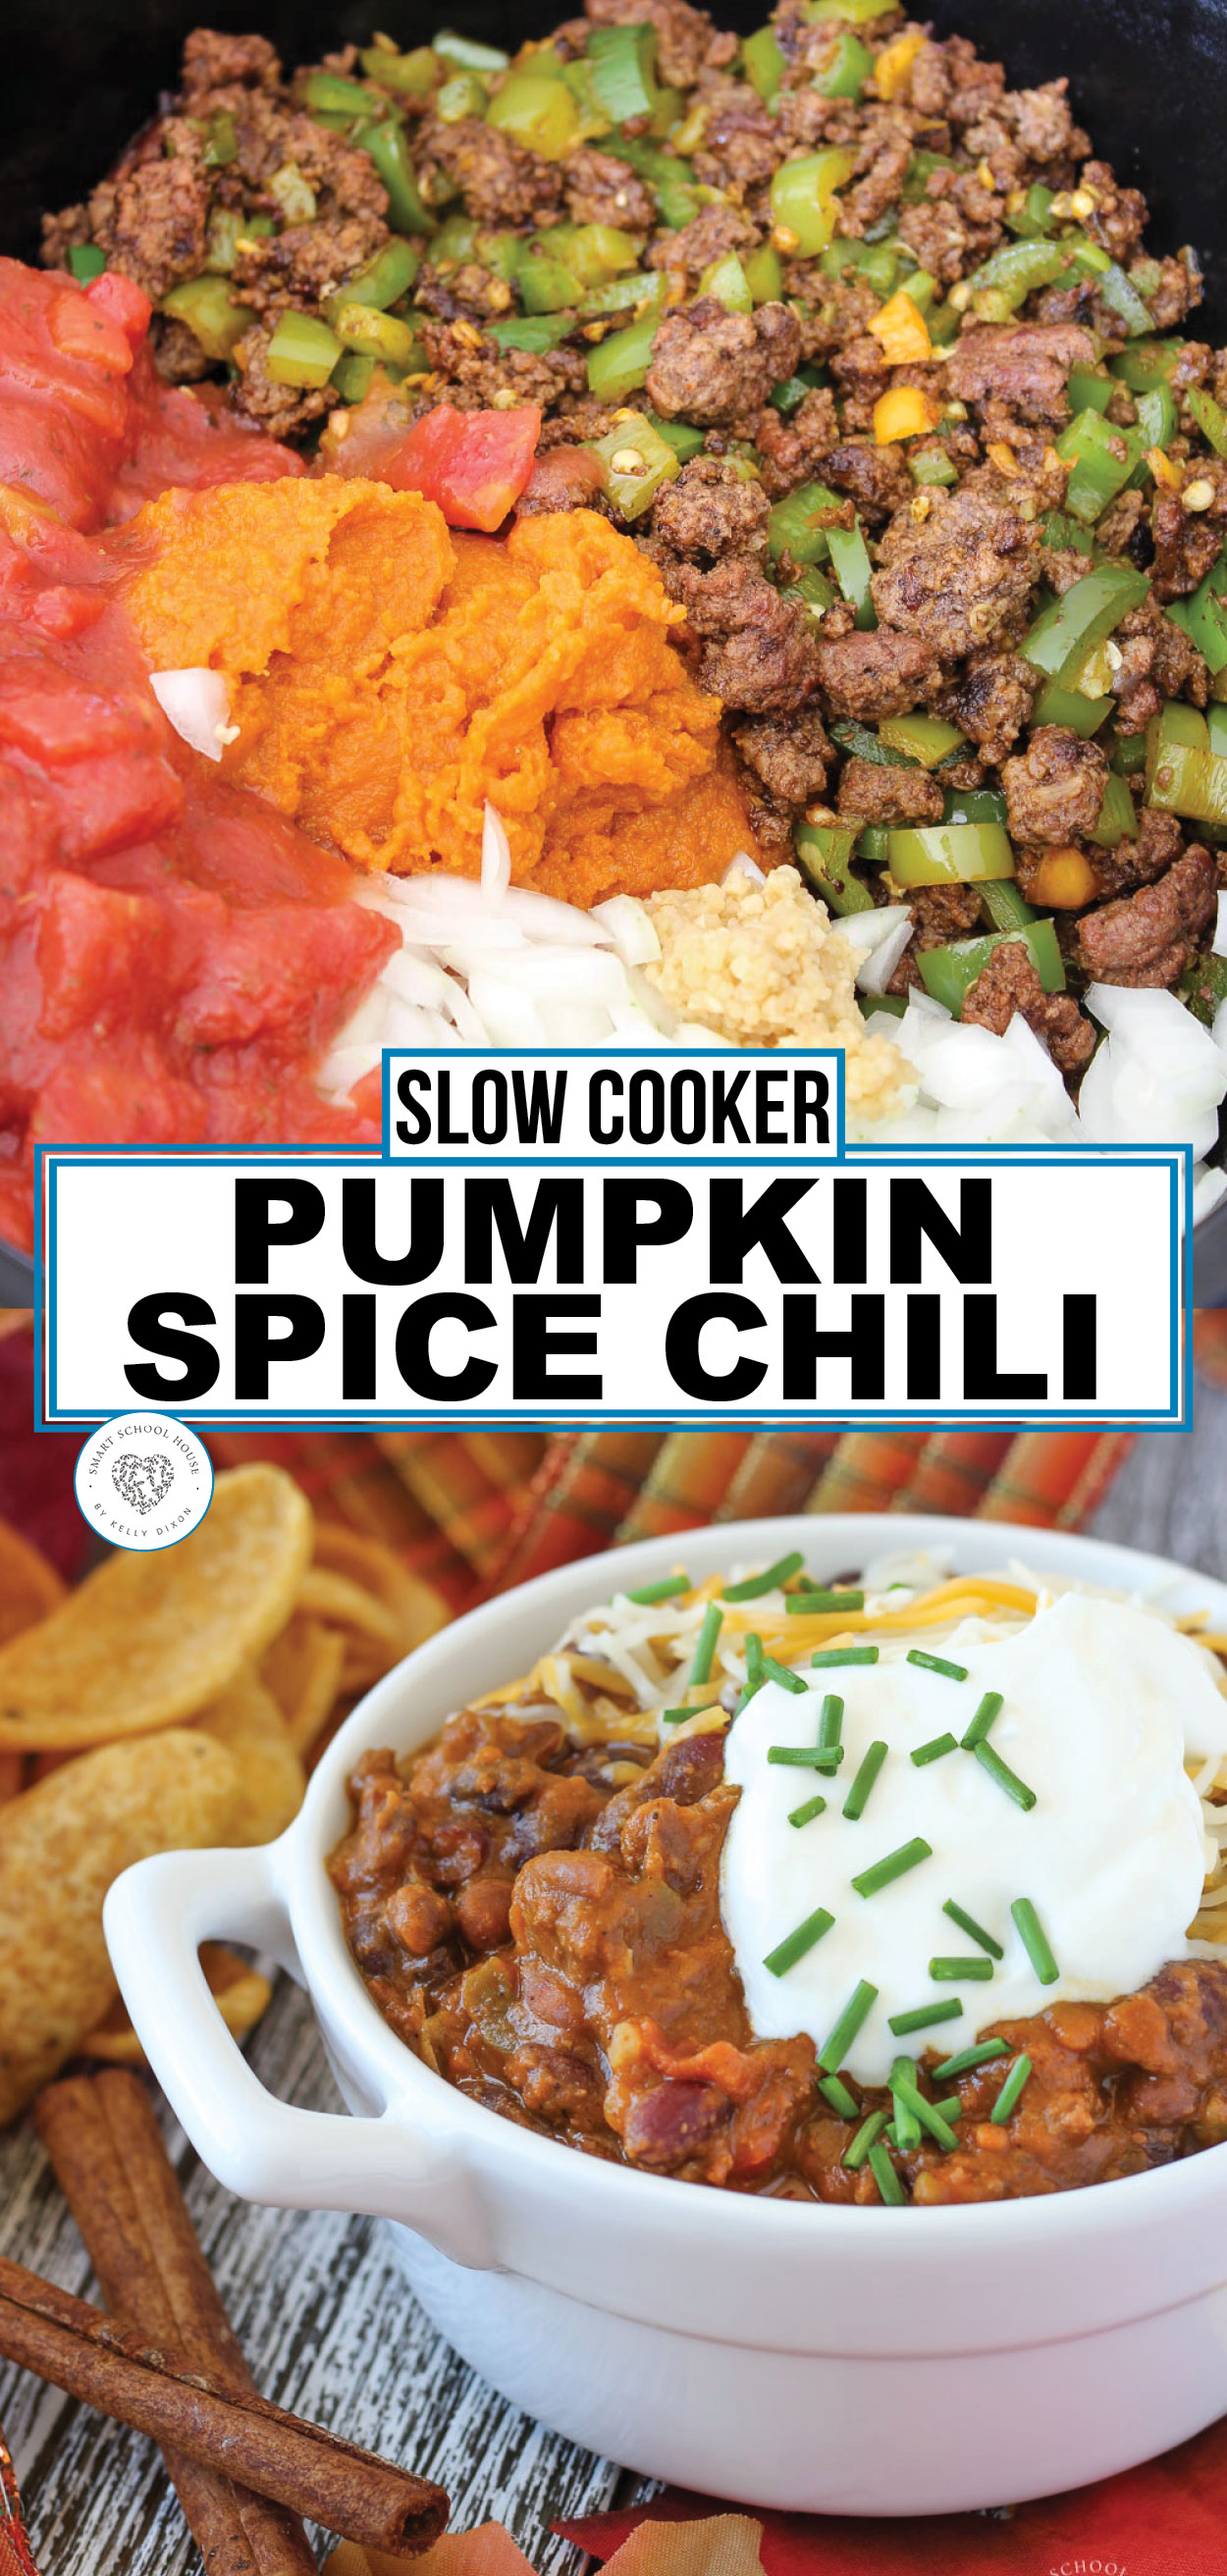 Crock Pot Pumpkin Spice Chili: You've got to taste it to believe it! It actually tastes like pumpkin spice mixed within a spicy and savory chili. Made with pumpkin purée in a slow cooker.